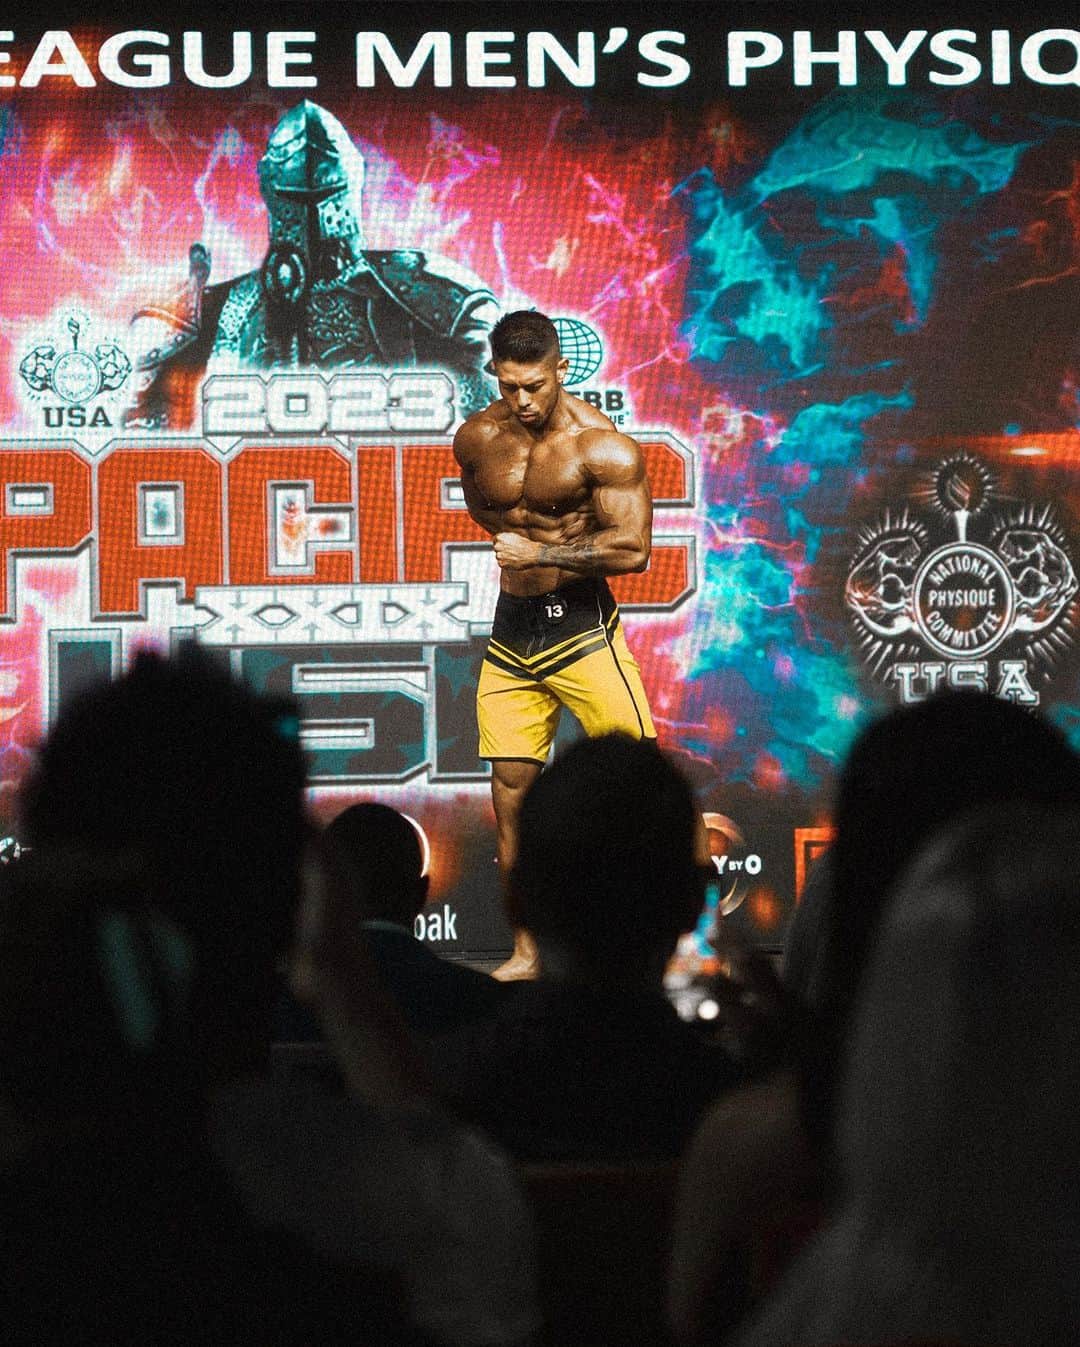 Kanekin Fitnessのインスタグラム：「San Diego Pro.  Showed up with what I consider my best physique to date. 11th is not the outcome I came for, but I’m only getter better and sooner or later I know I’ll be undeniable. Just wait and see.  過去ベストのフィジークで挑んだものの、結界は11位。  今回の旅で色んなことを学びました。 更に強くなりました。 2週間後の東京プロで必ず勝ちます。 見ててください。  Special thanks to @revoprojp  REVOPRO Presentsのカウントダウンシリーズお楽しみいただけてますでしょうか？Show Day動画お楽しみに！」